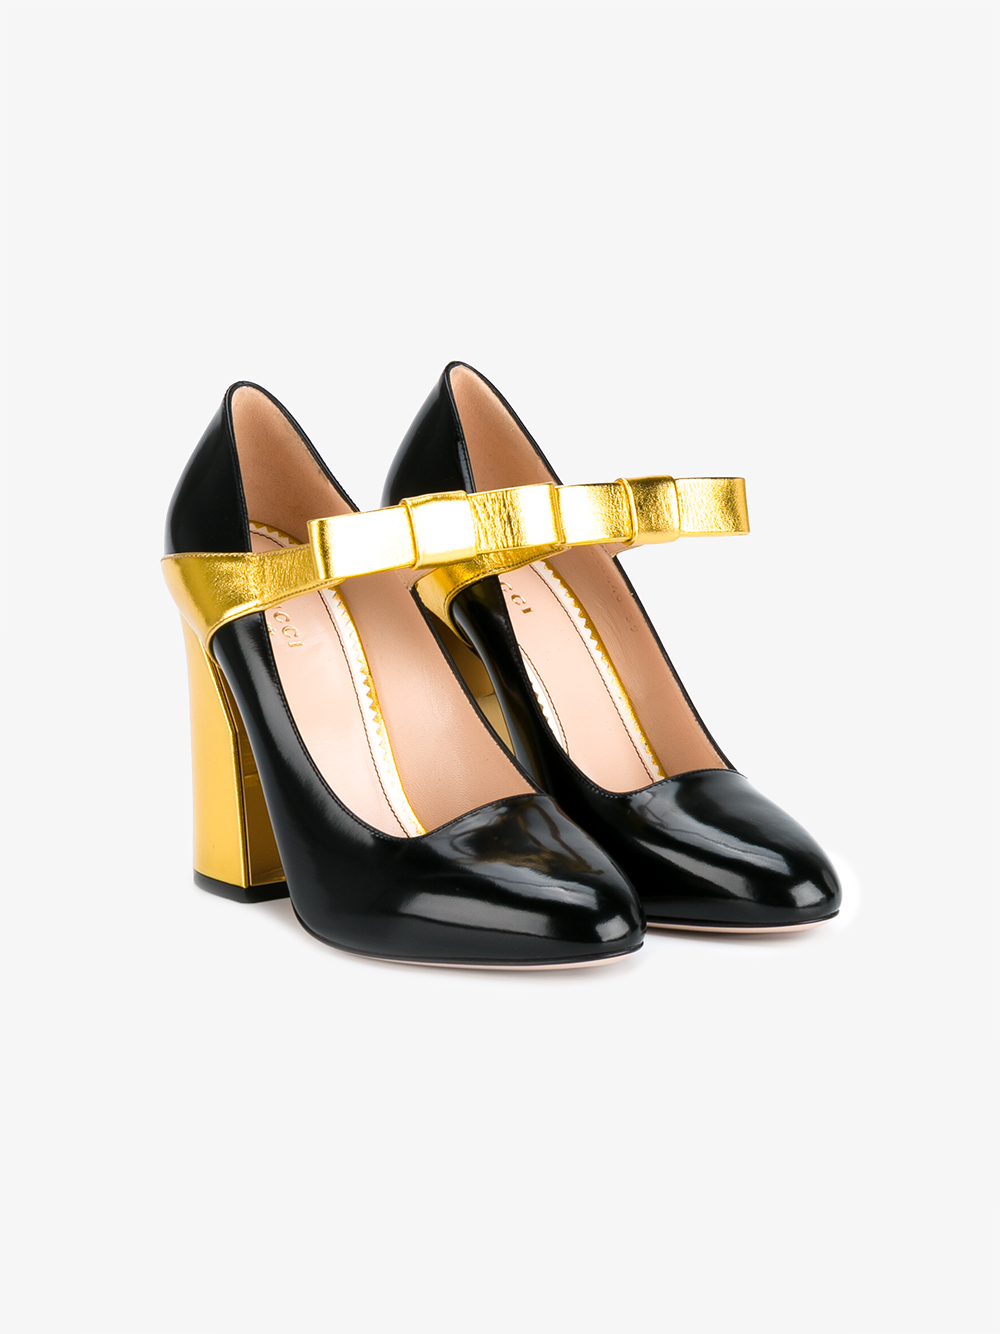 Lyst Gucci Mary  Jane  Bow  Leather Pumps in Black